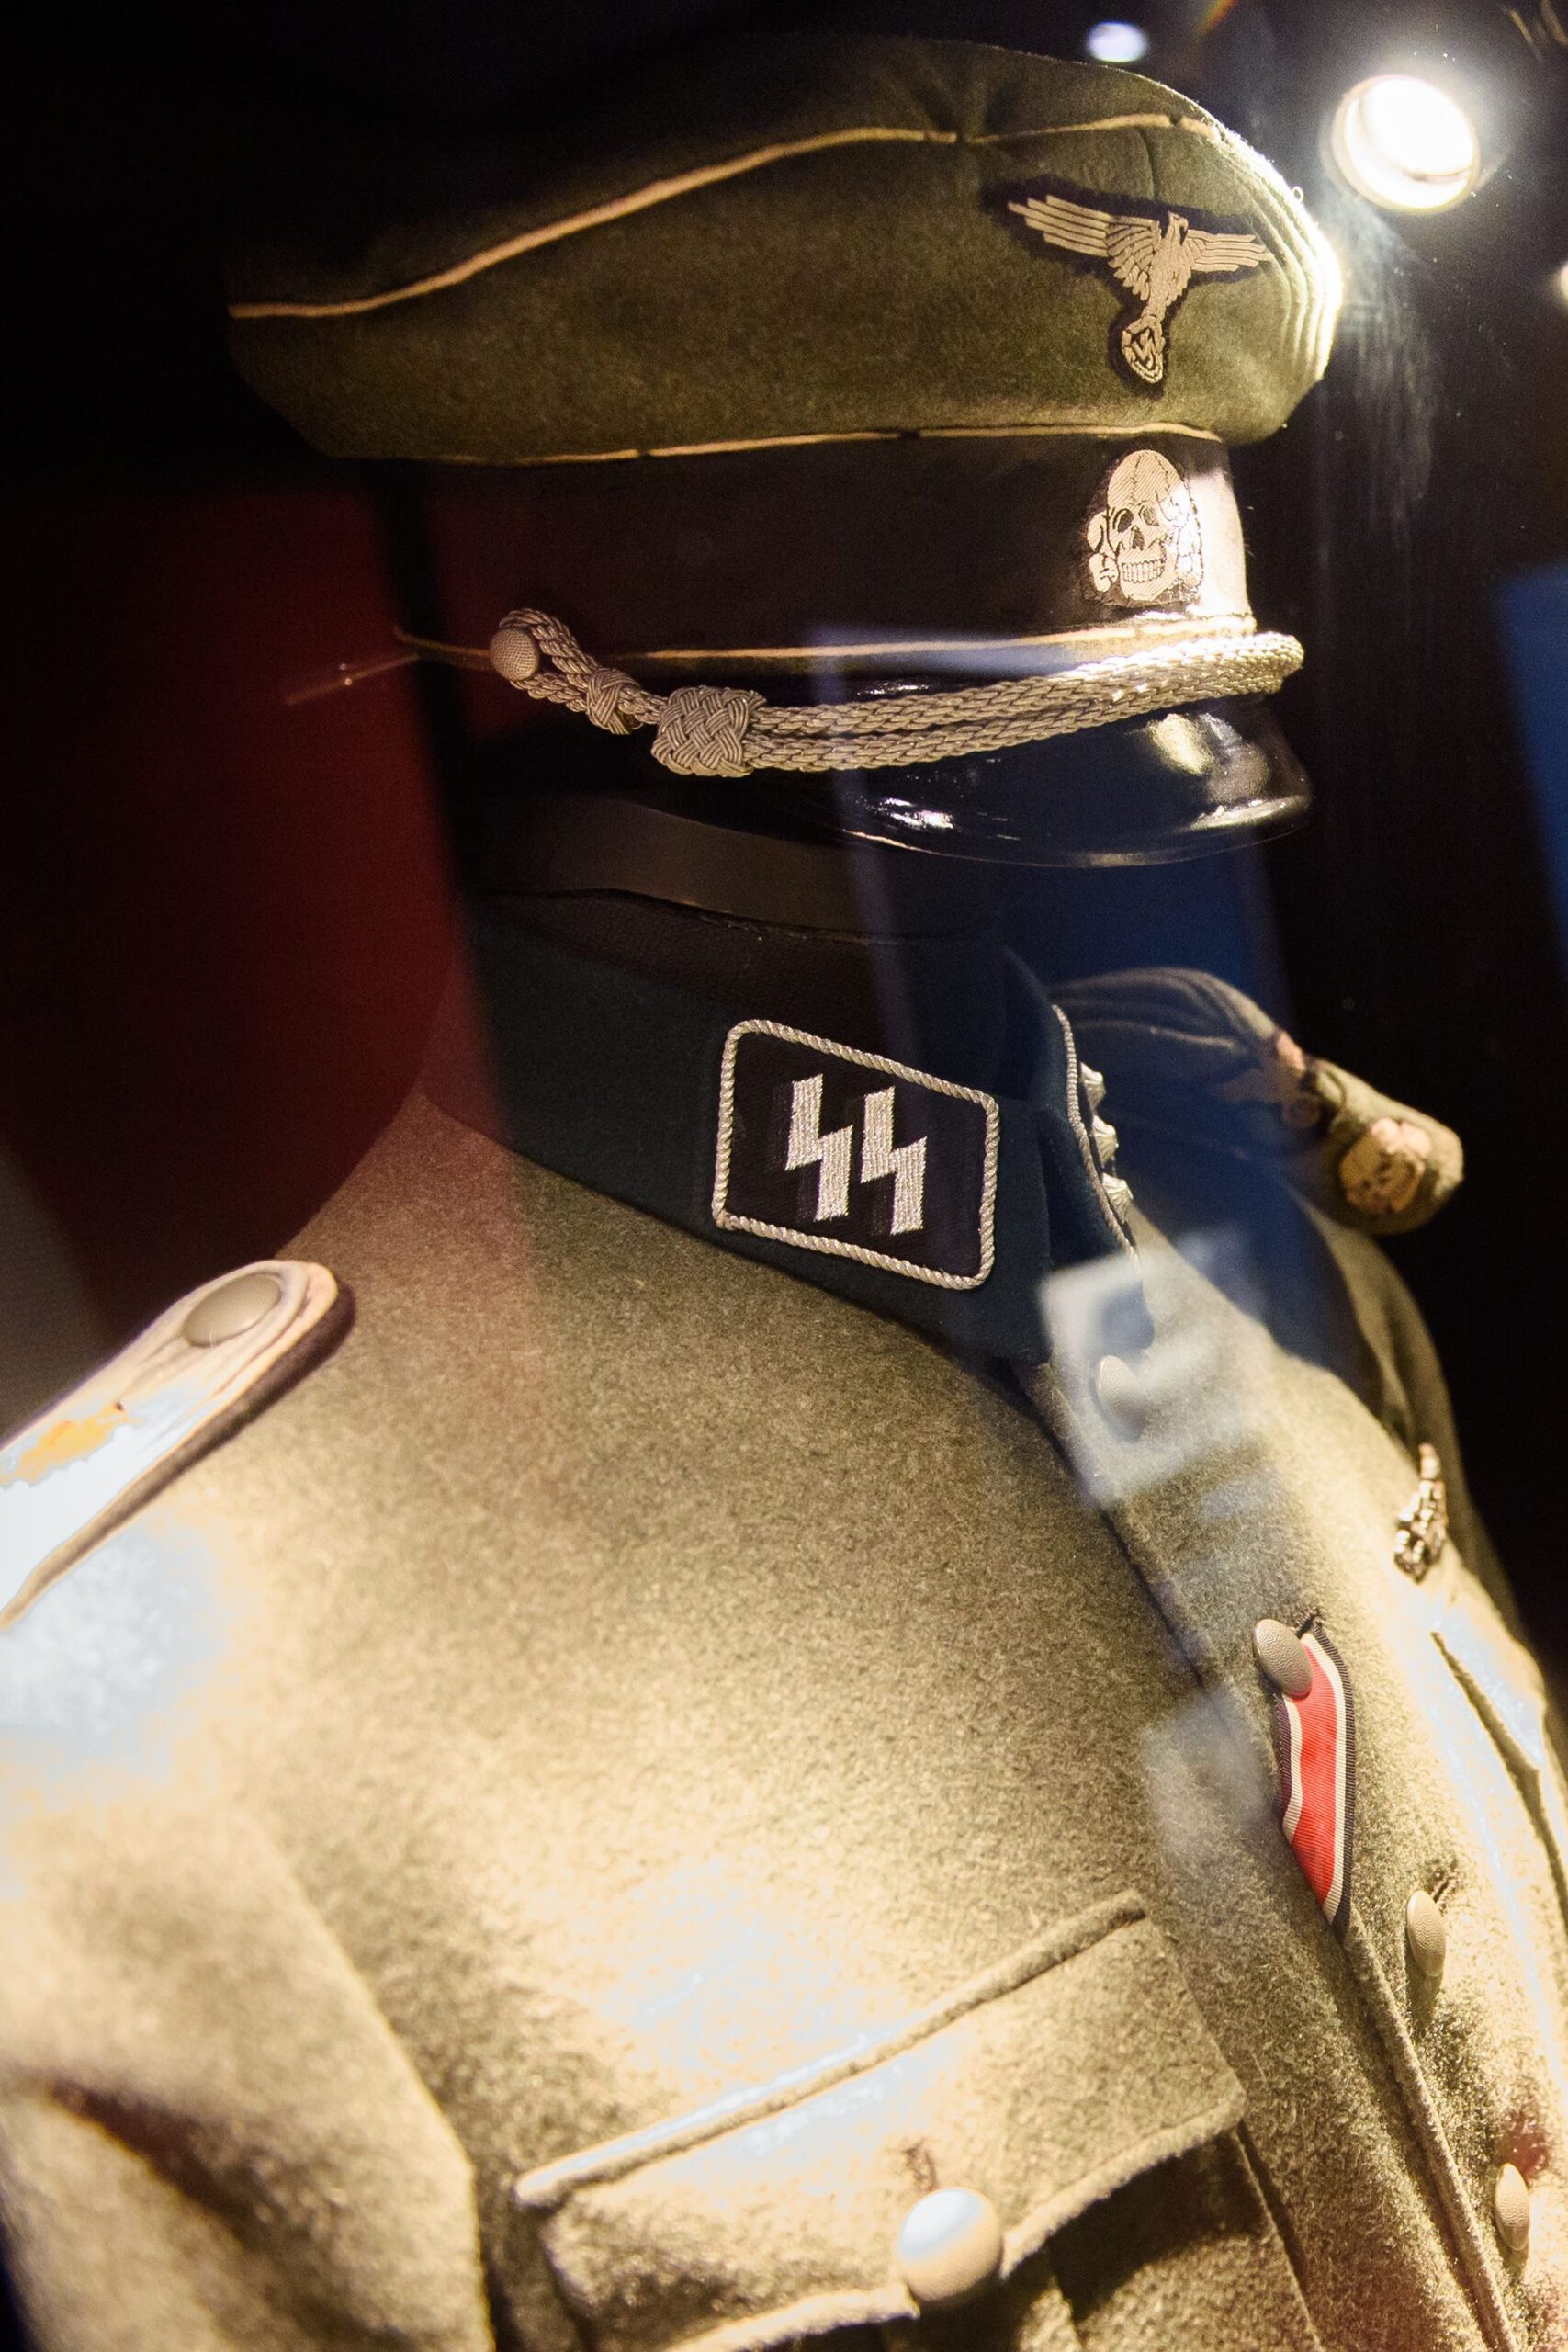 An example of the SS logo as seen on a historical uniform at the Deutsches Museum in Sonderburg, Denmark.